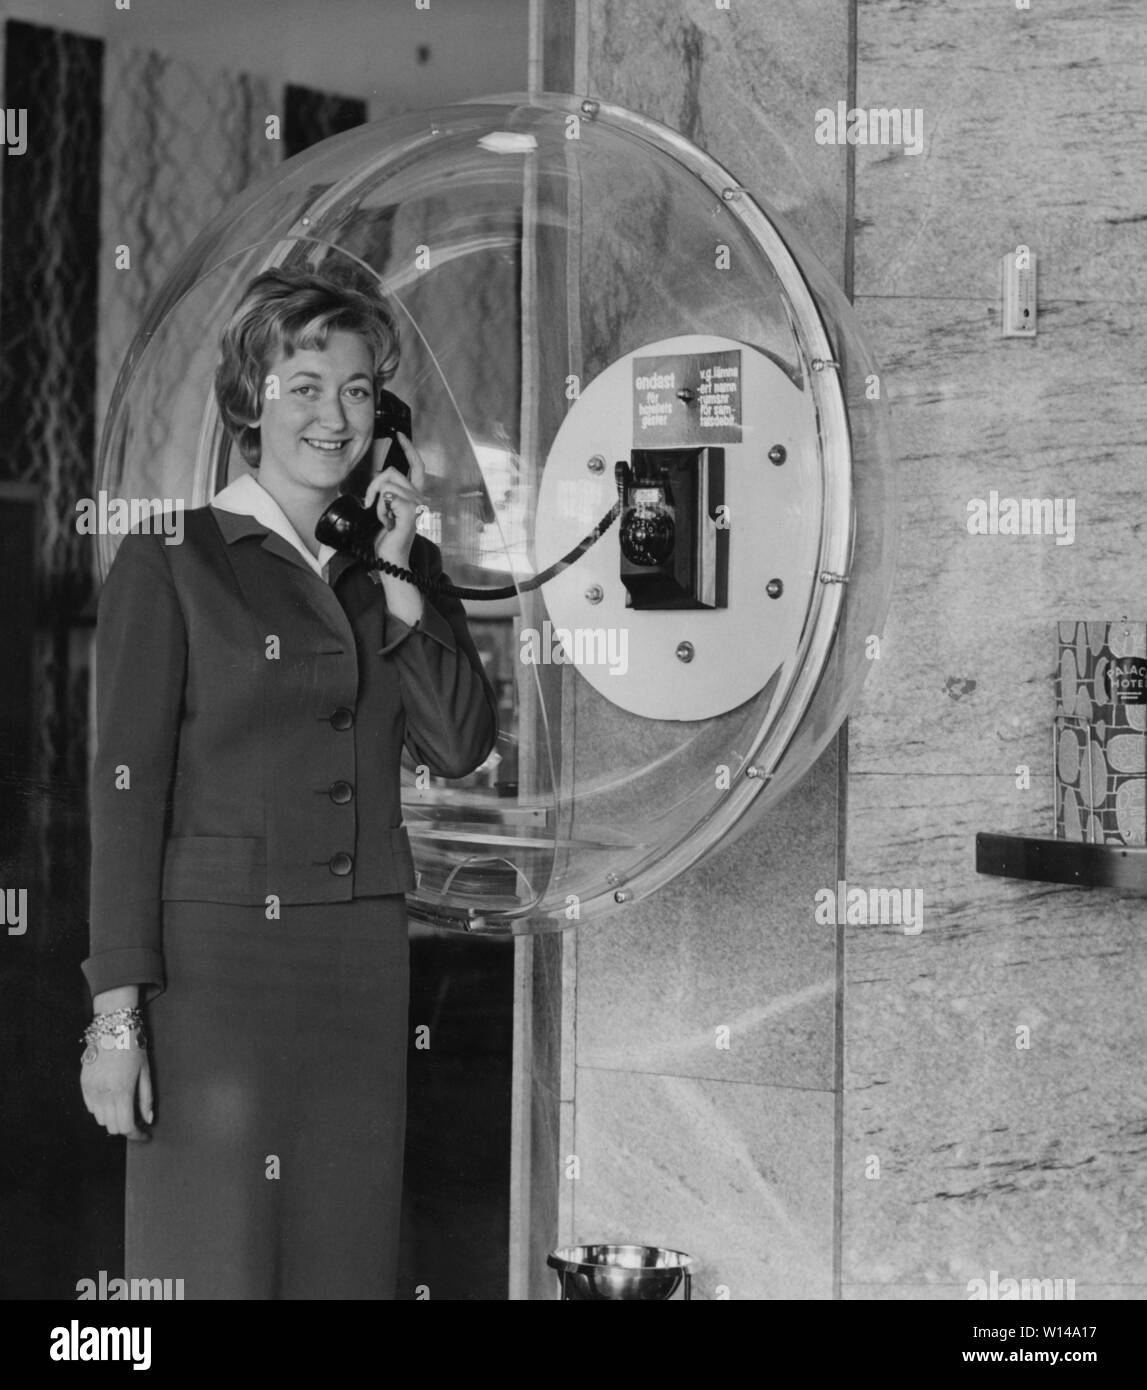 Phoning in the 1950s. An employee of a Palace hotel is showing the new courtesy phone installed in the lobby. Telephone in the 1950s. She is wearing a typical 50s dress and having a telephone conversation. The acrylic dome is a functional design where the person talking, is not being overheard by someone and also blocking the surrounding background noice. Sweden 1950s Stock Photo